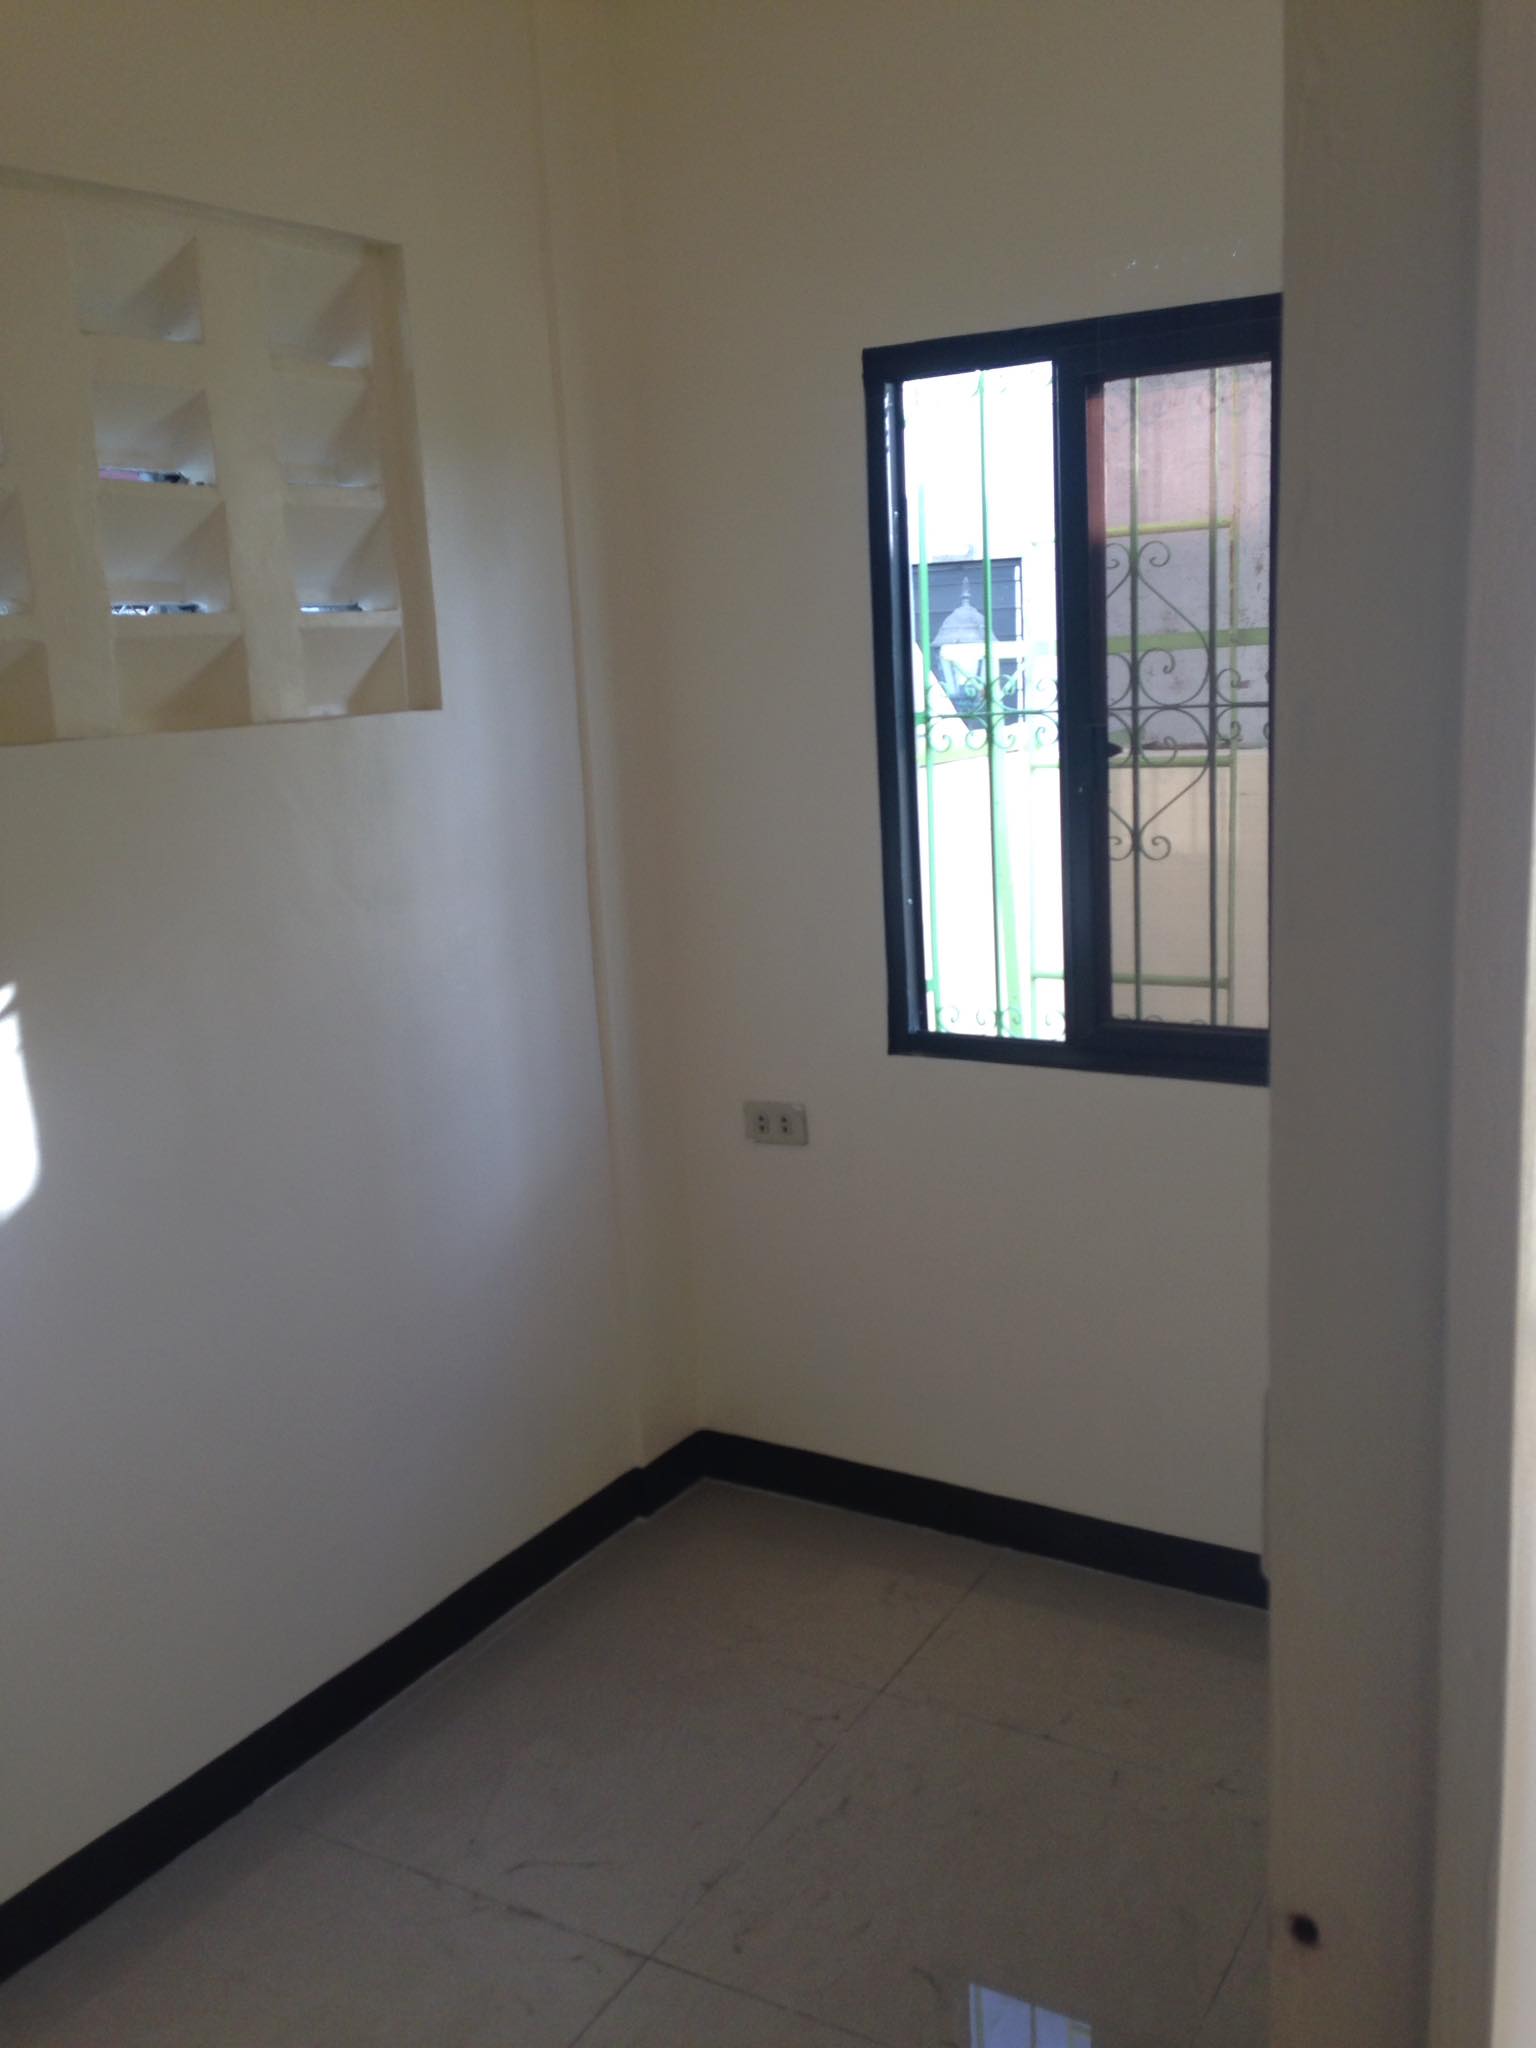 ROOM FOR RENT MAKATI